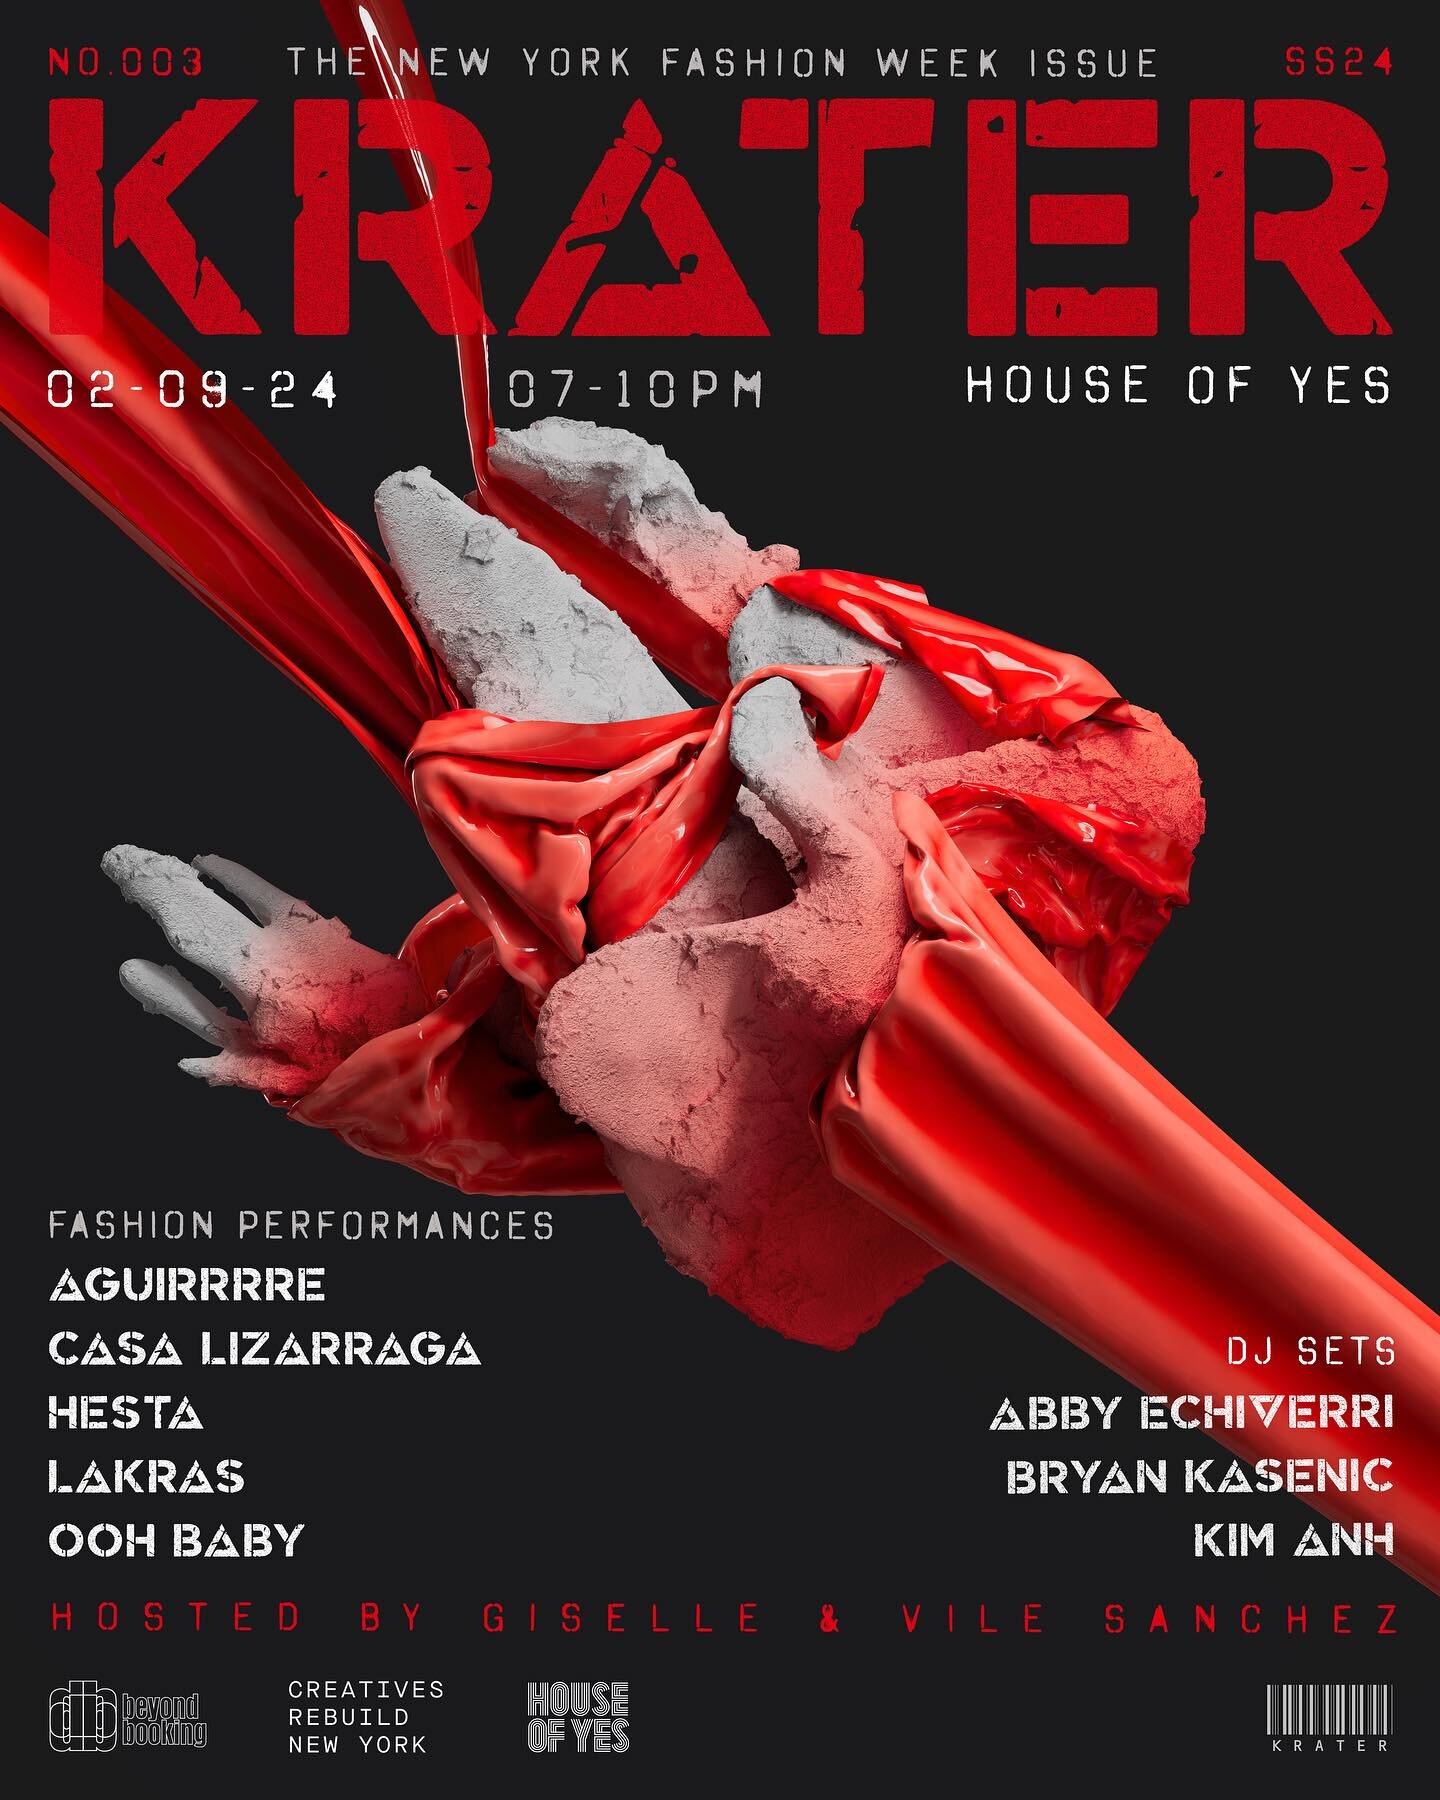 So excited to announce we are showing Feb 9th with @wearekrater at @houseofyesnyc!! Tix available in out bio and at:

https://hestaverse.com/krater-hesta-runway